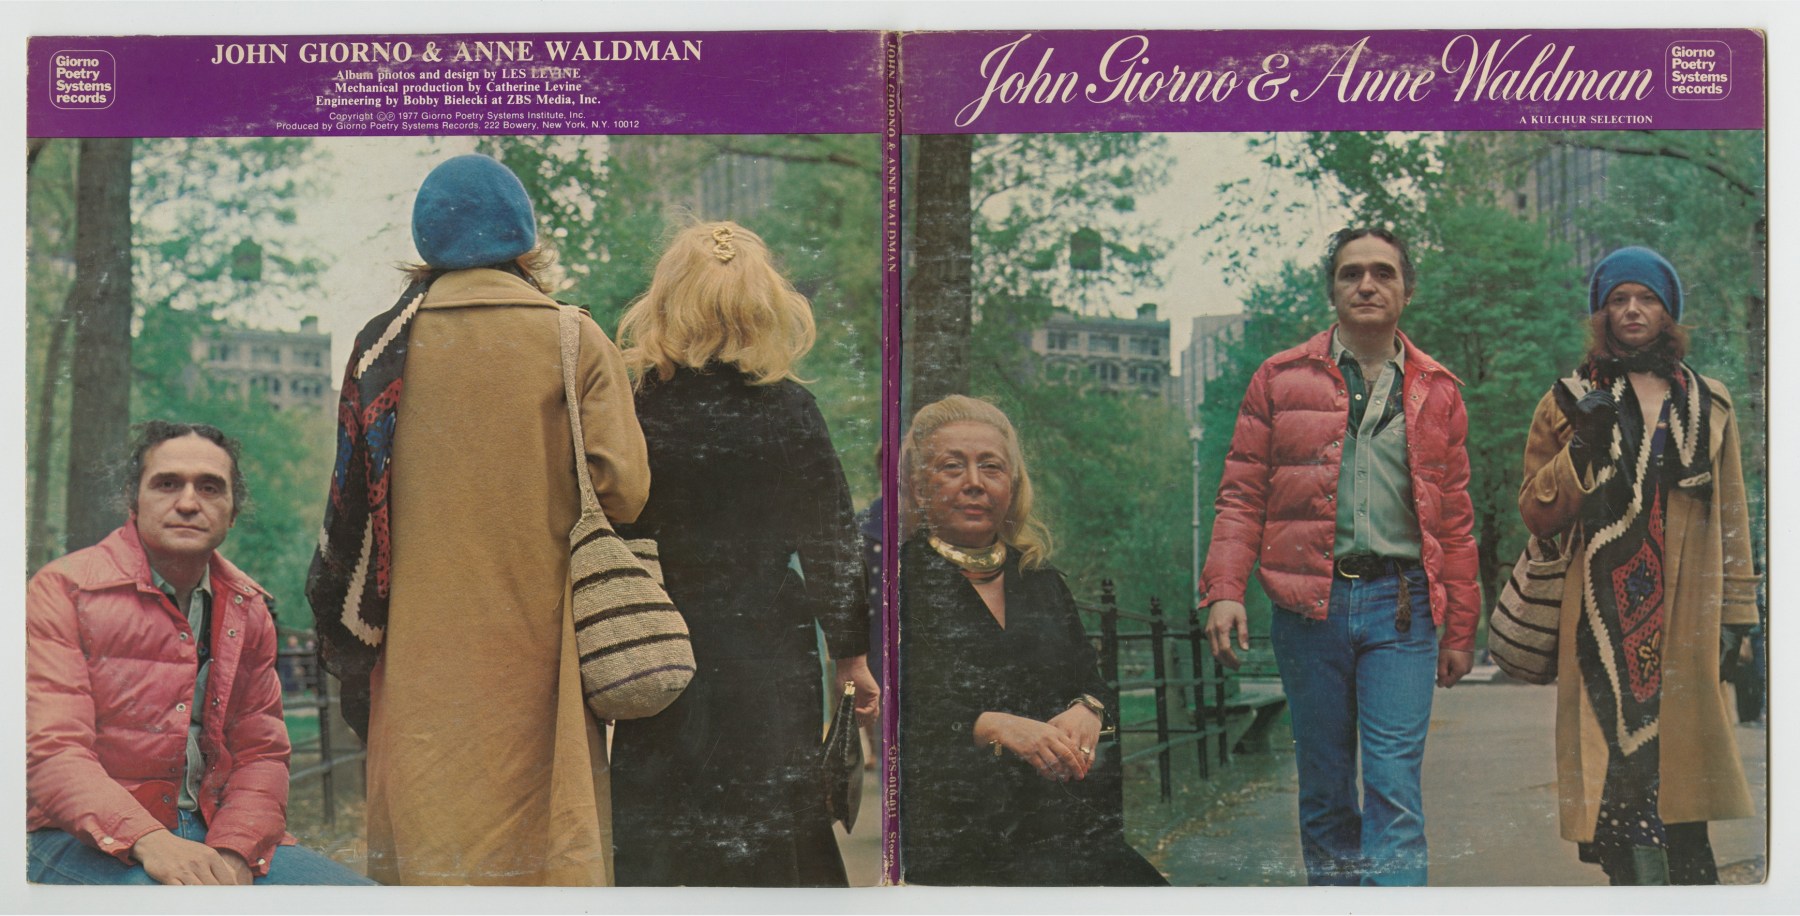 John Giorno and Anne Waldman: A Kulchur Selection (1977), front and back covers